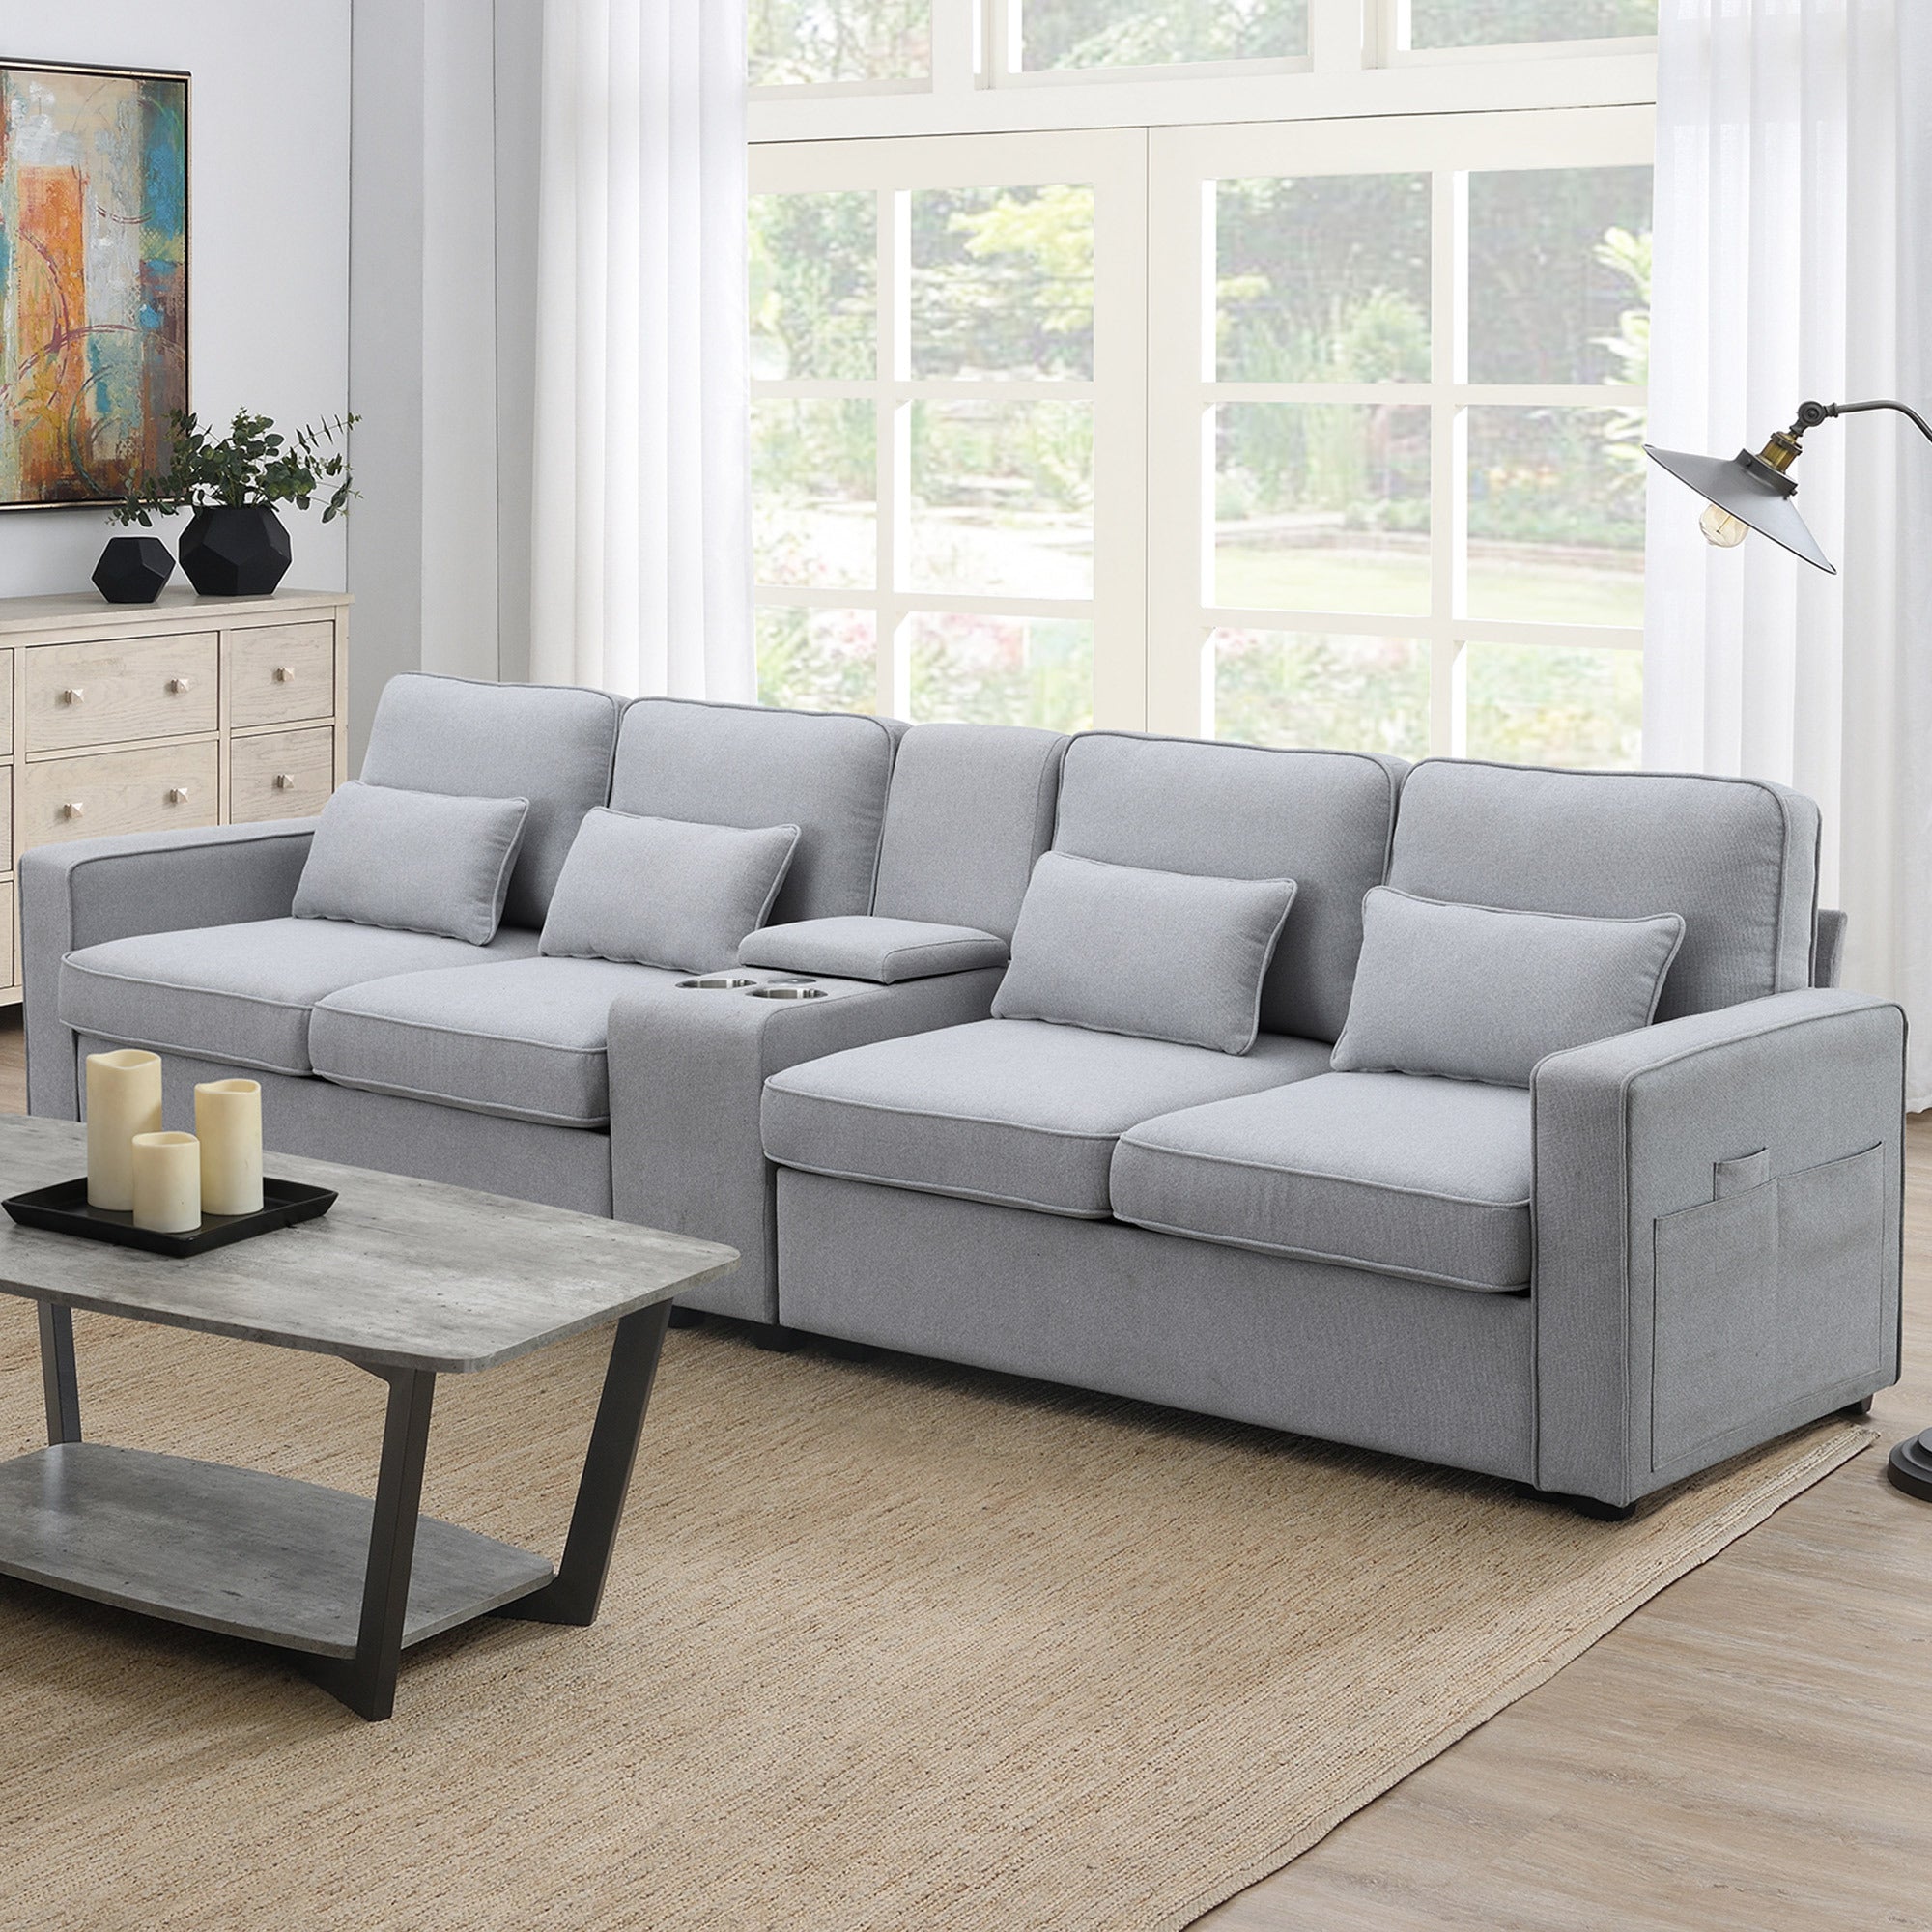 Clint 114.2" Light Gray Linen 4 Seater Sofa with Console, 2 Cupholders and 2 USB Ports Wired or Wirelessly Charged